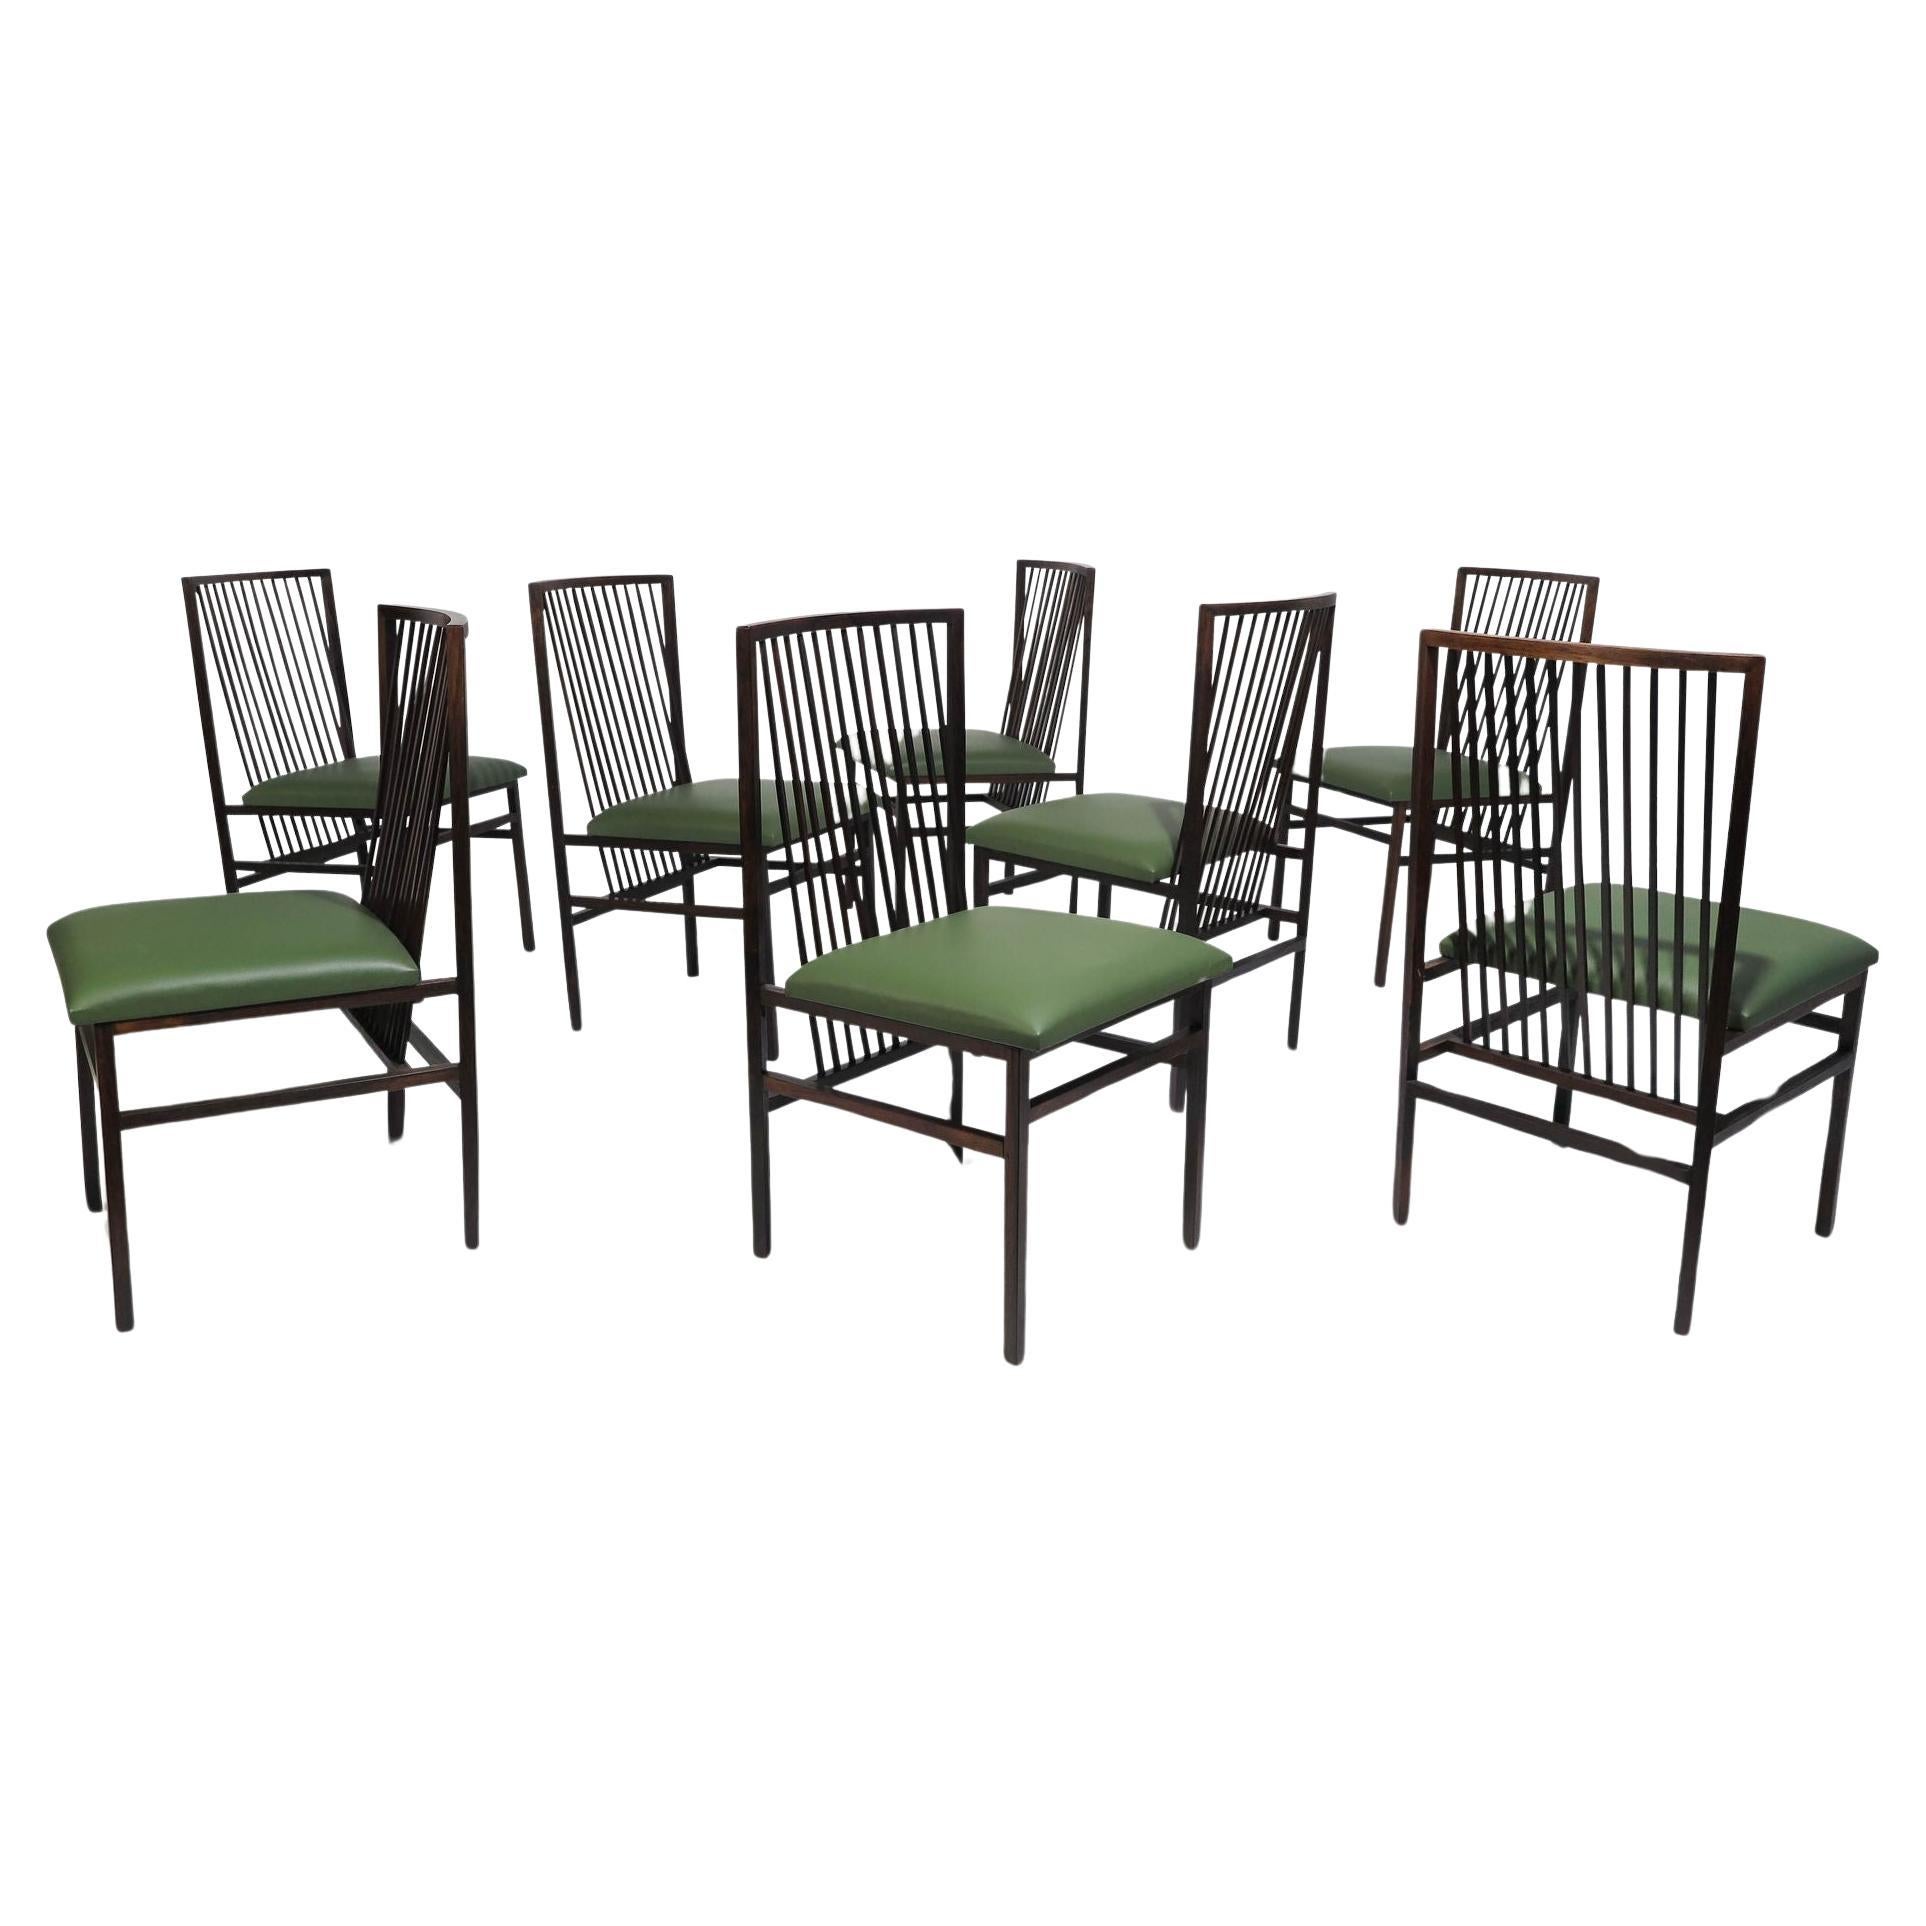 Eight Estrutural Structural Brazil Modern Chairs For Sale